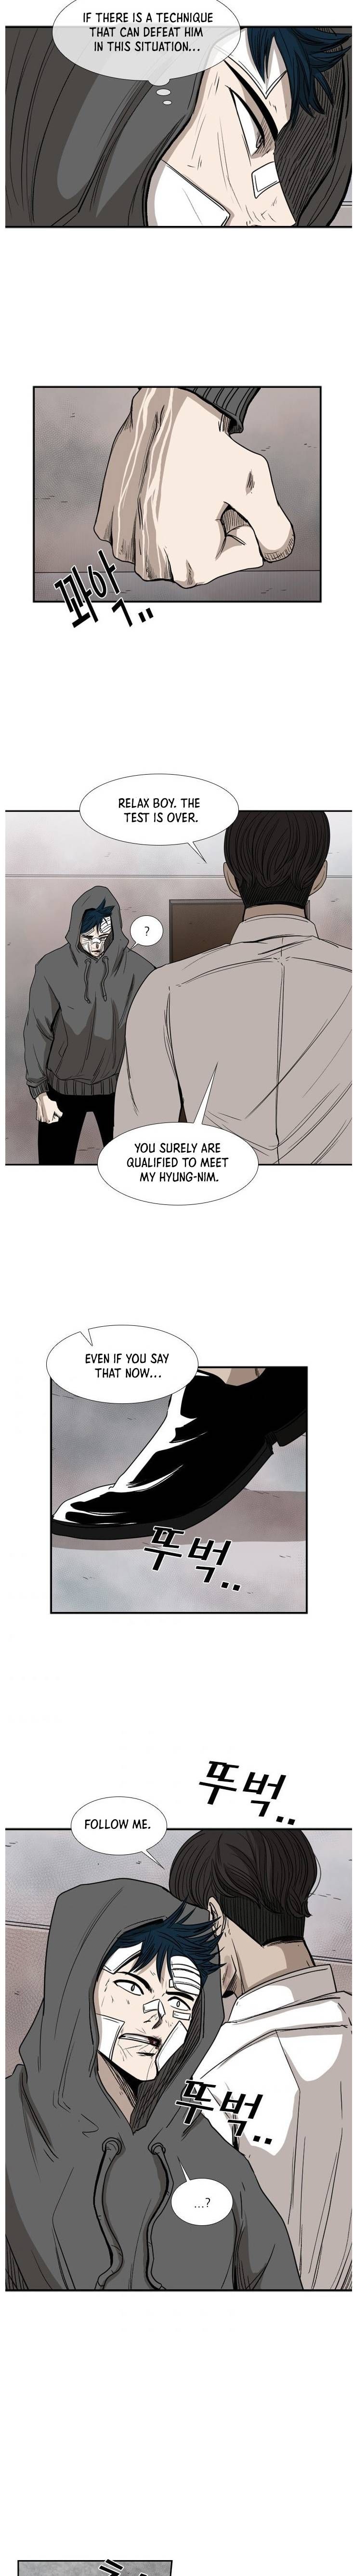 Shark Chapter 91 page 15